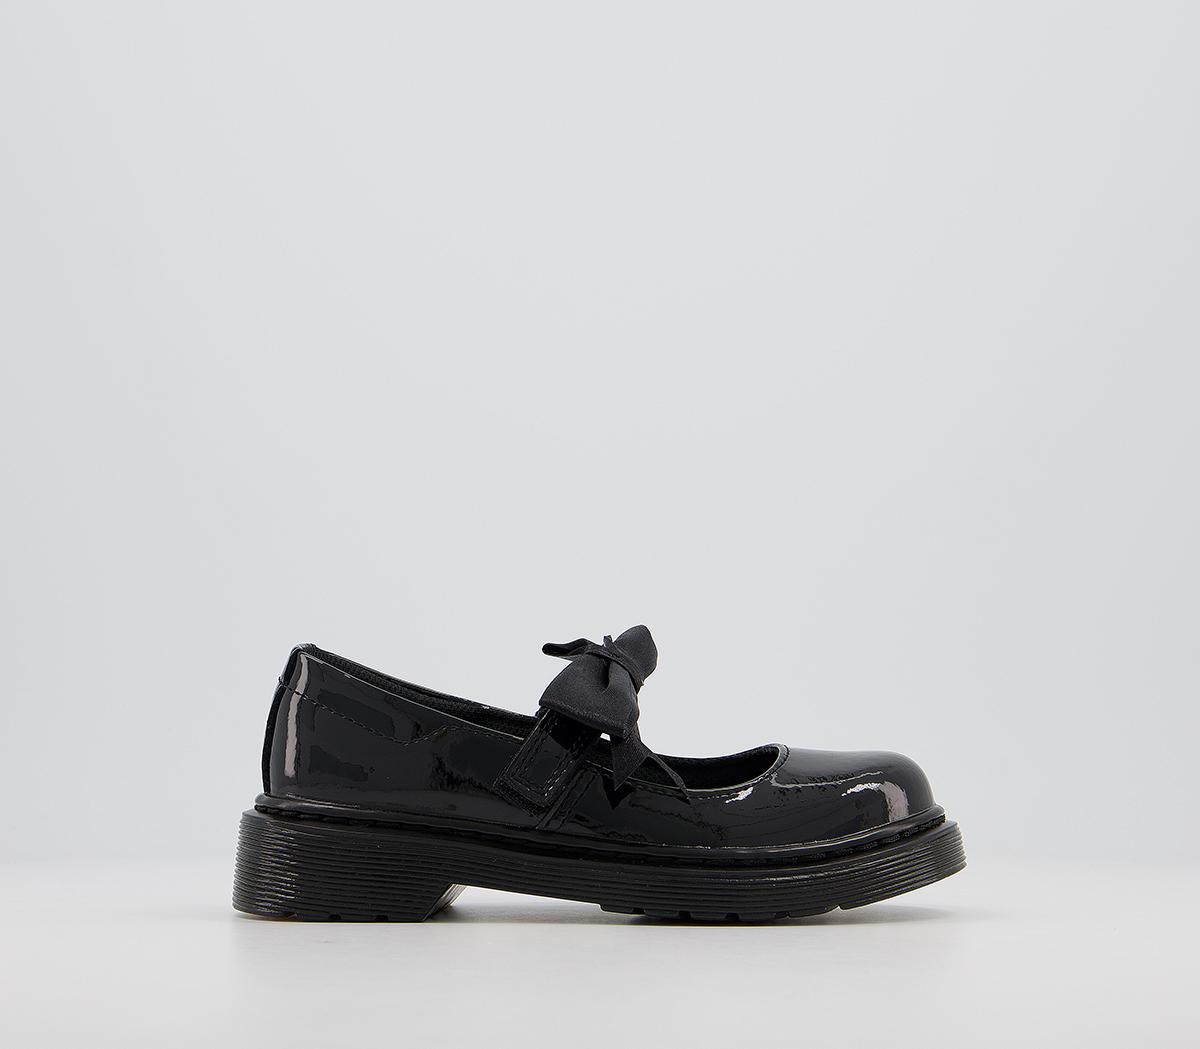 Dr. MartensMaccy II Bow Mary Jane Kids ShoesBlack Patent Leather